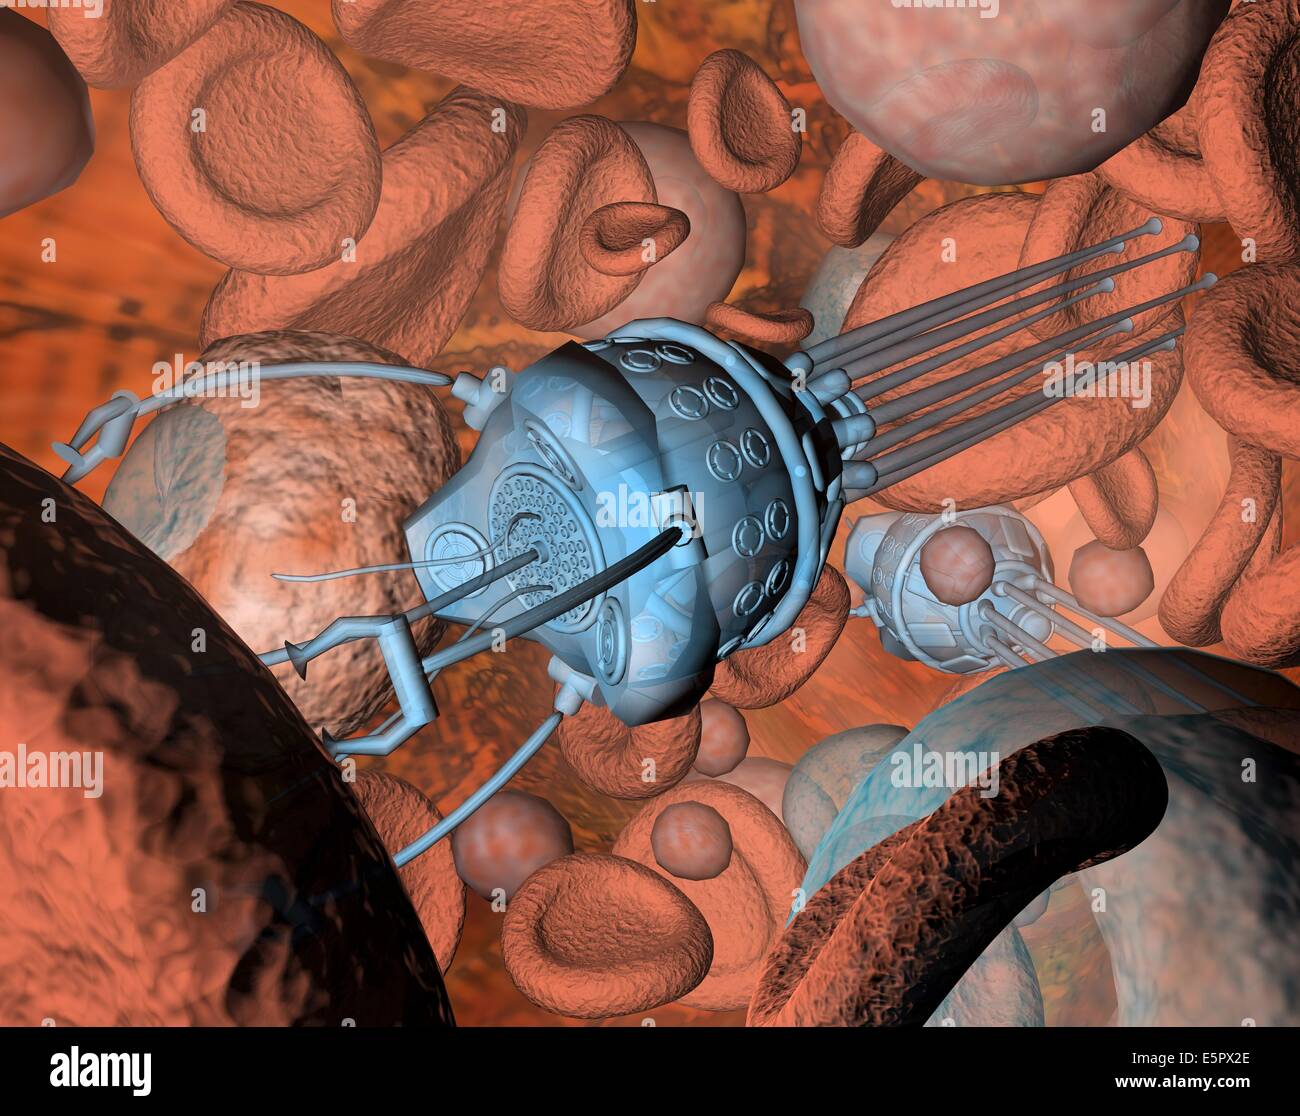 Computer illustration of nanorobot repairing a red blood cells with intracytoplasmic nanomanipulators. Stock Photo